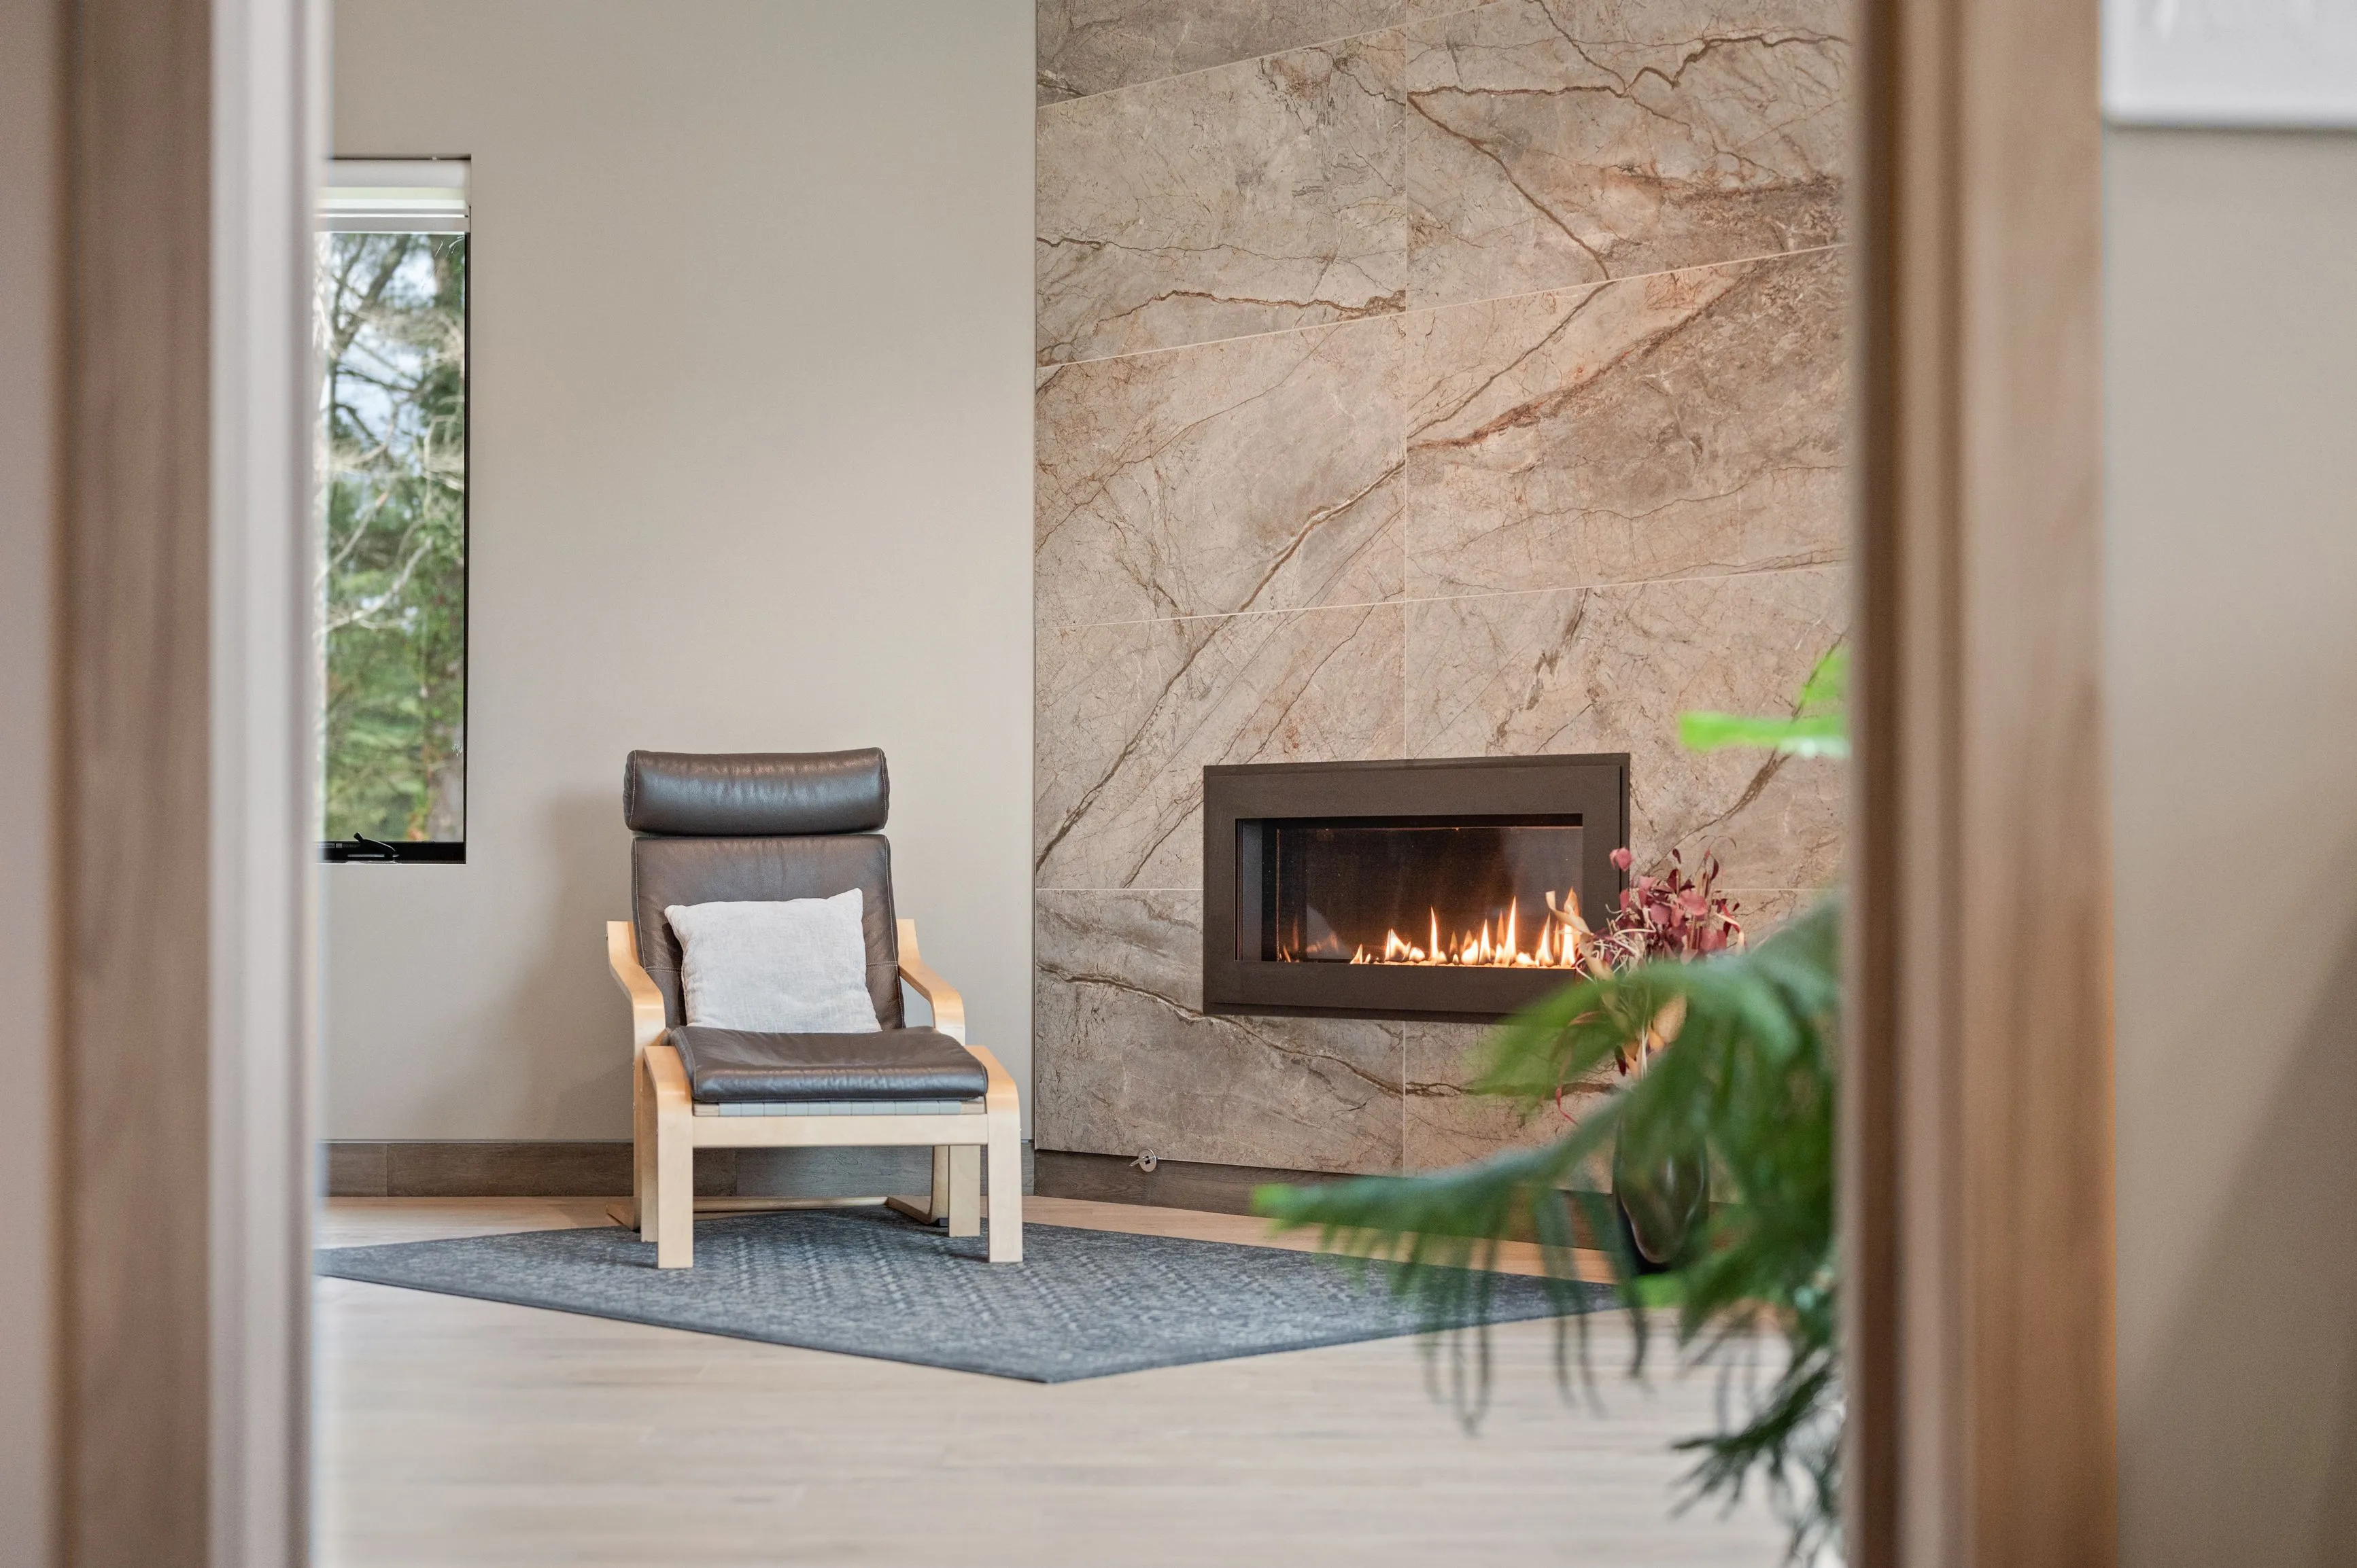 Modern cozy living room with a leather armchair, a lit fireplace surrounded by natural stone tiles, and a view of greenery outside the window.